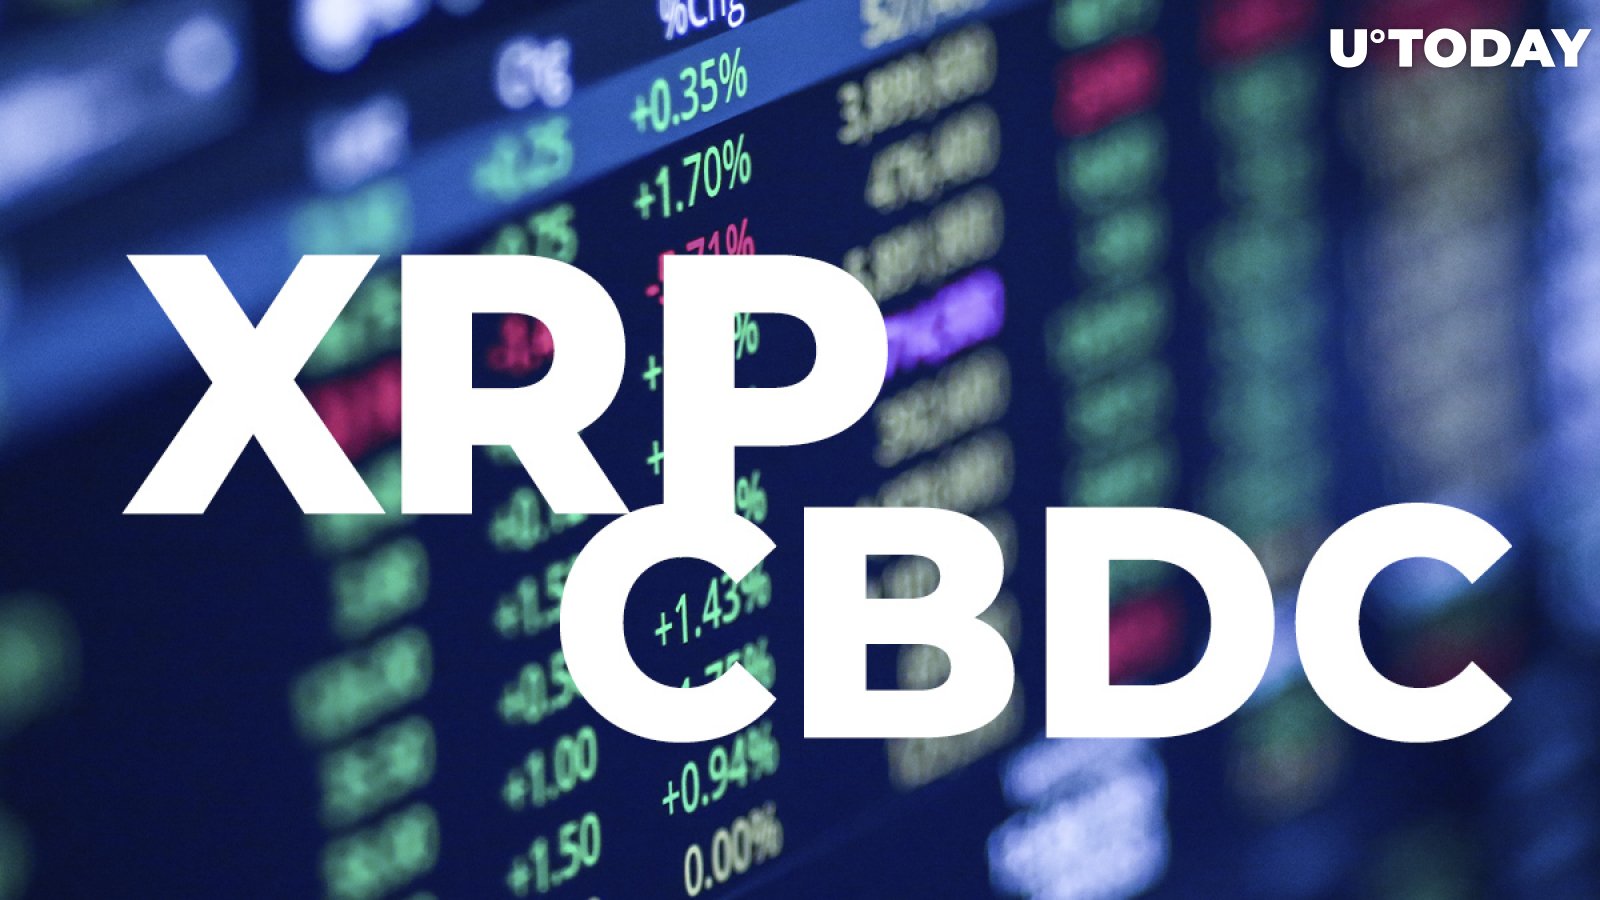 XRP Can Support Direct Exchange of CBDCs: Ripple